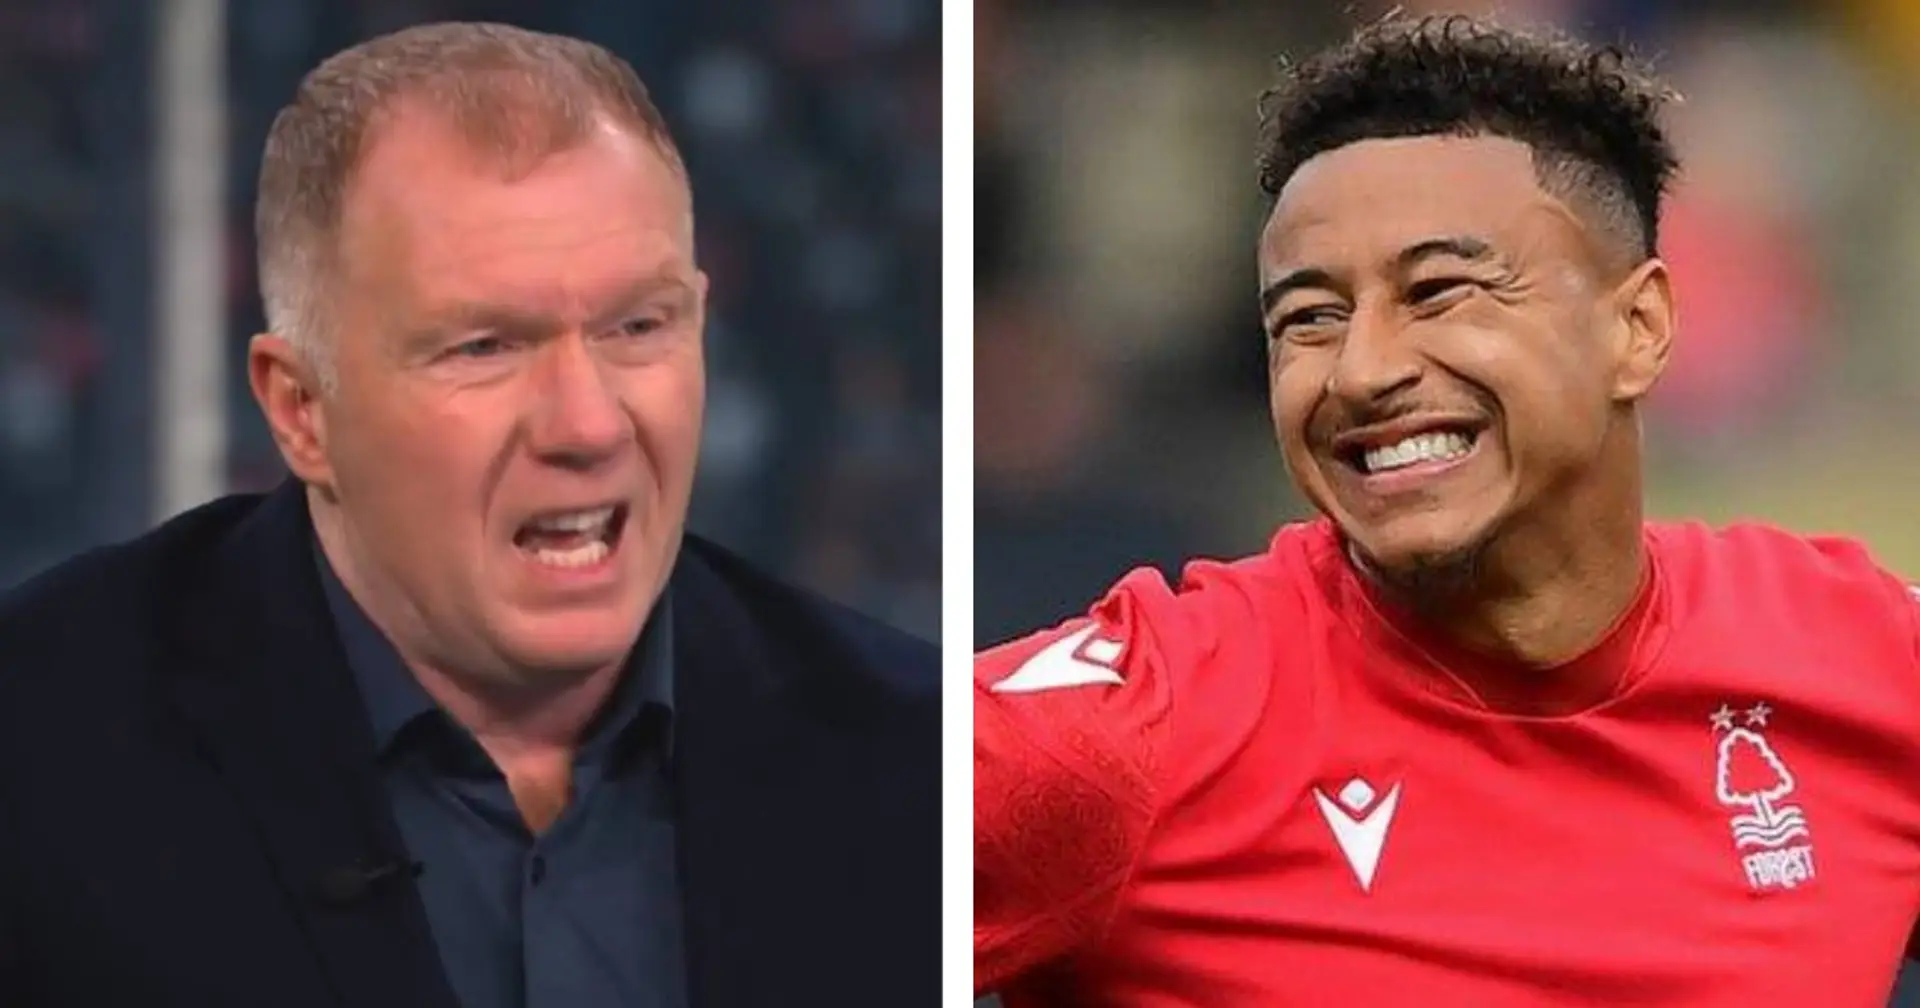 Jesse Lingard shares classy response to Paul Scholes' brutal comment on Instagram